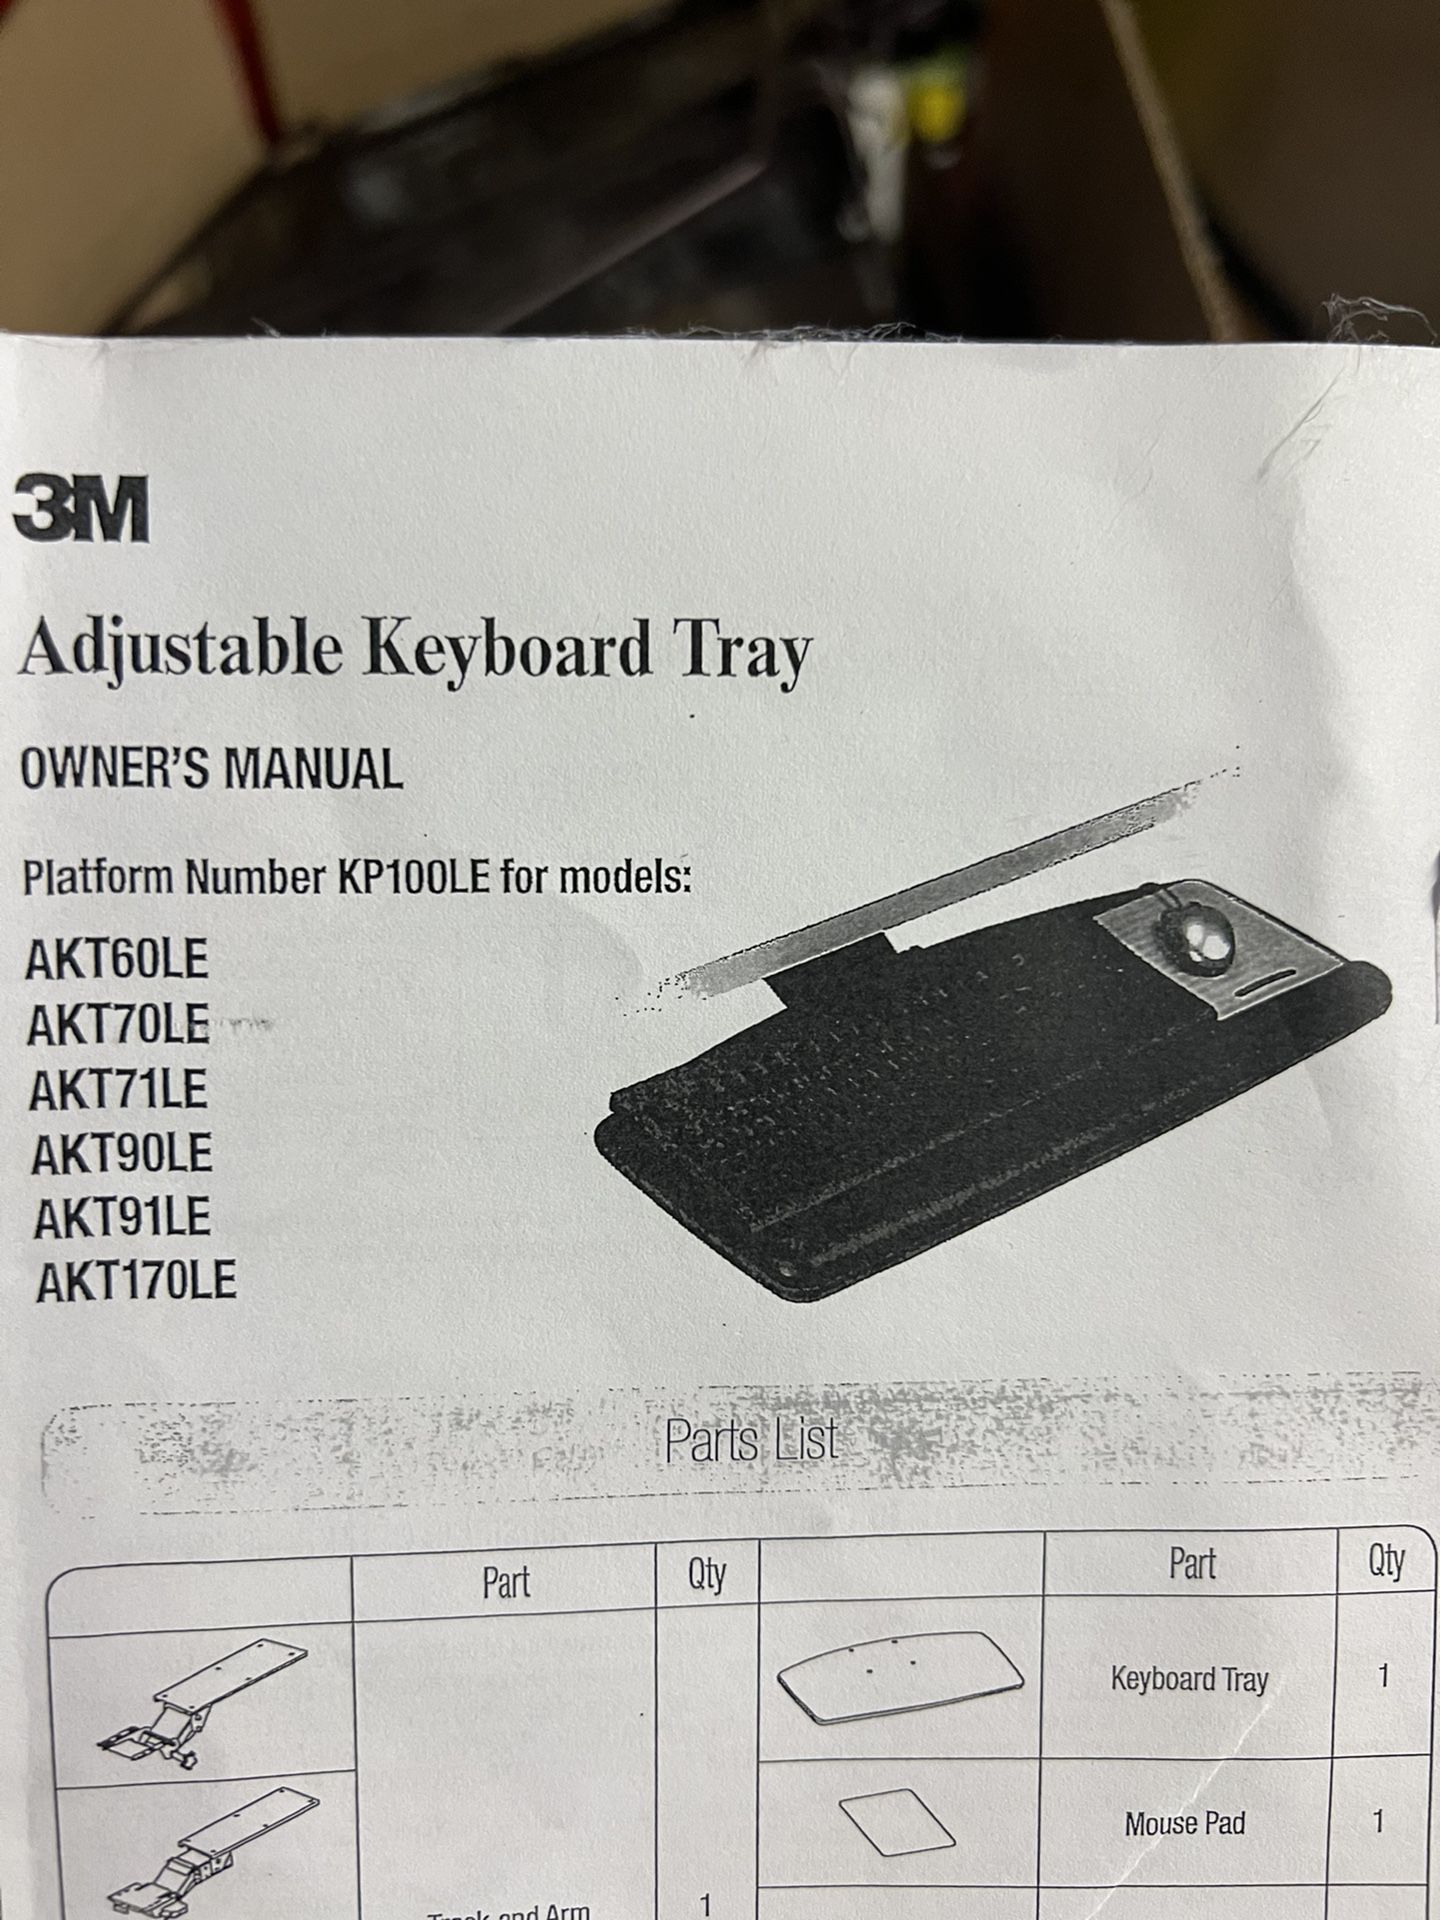 NEW Adjustable Keyboard Tray! IN BOX NEVER USED!! 